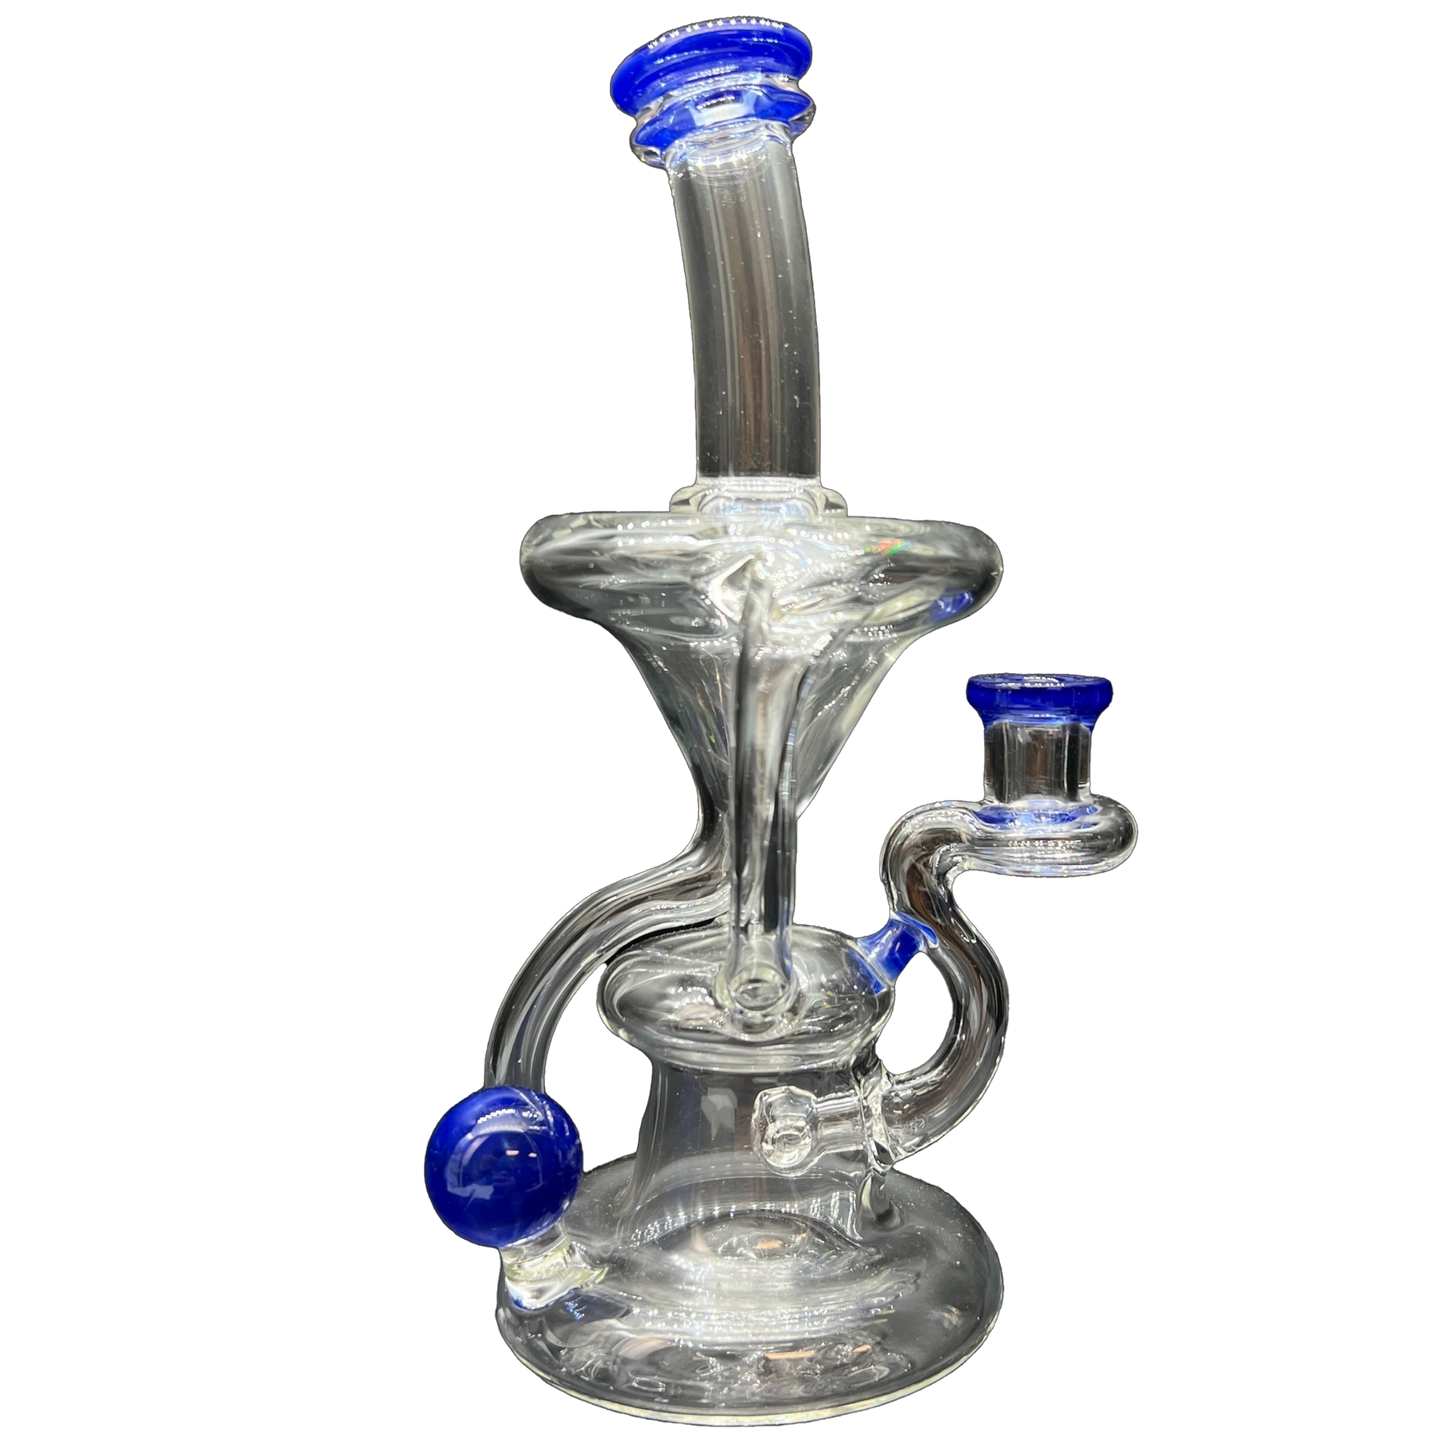 Andrew Logi - 2x1 Recycler Clear w/Color Accents